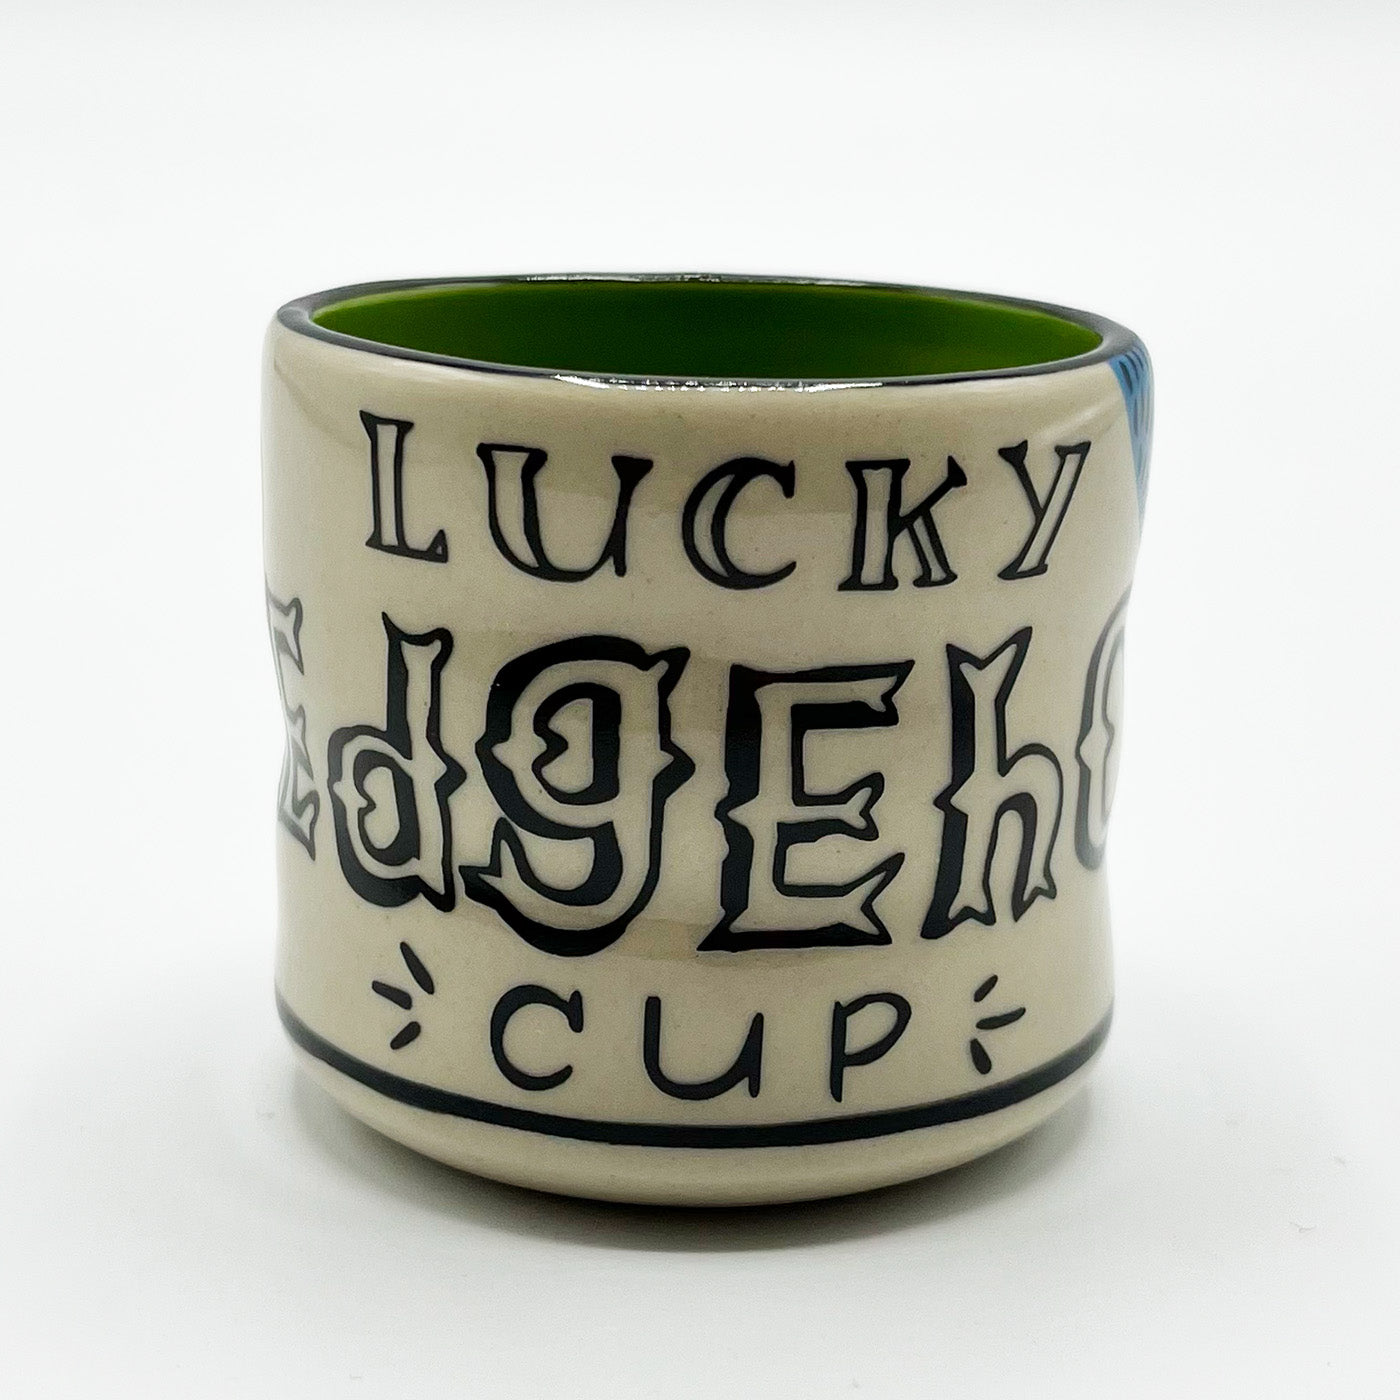 First Edition - Small Cup